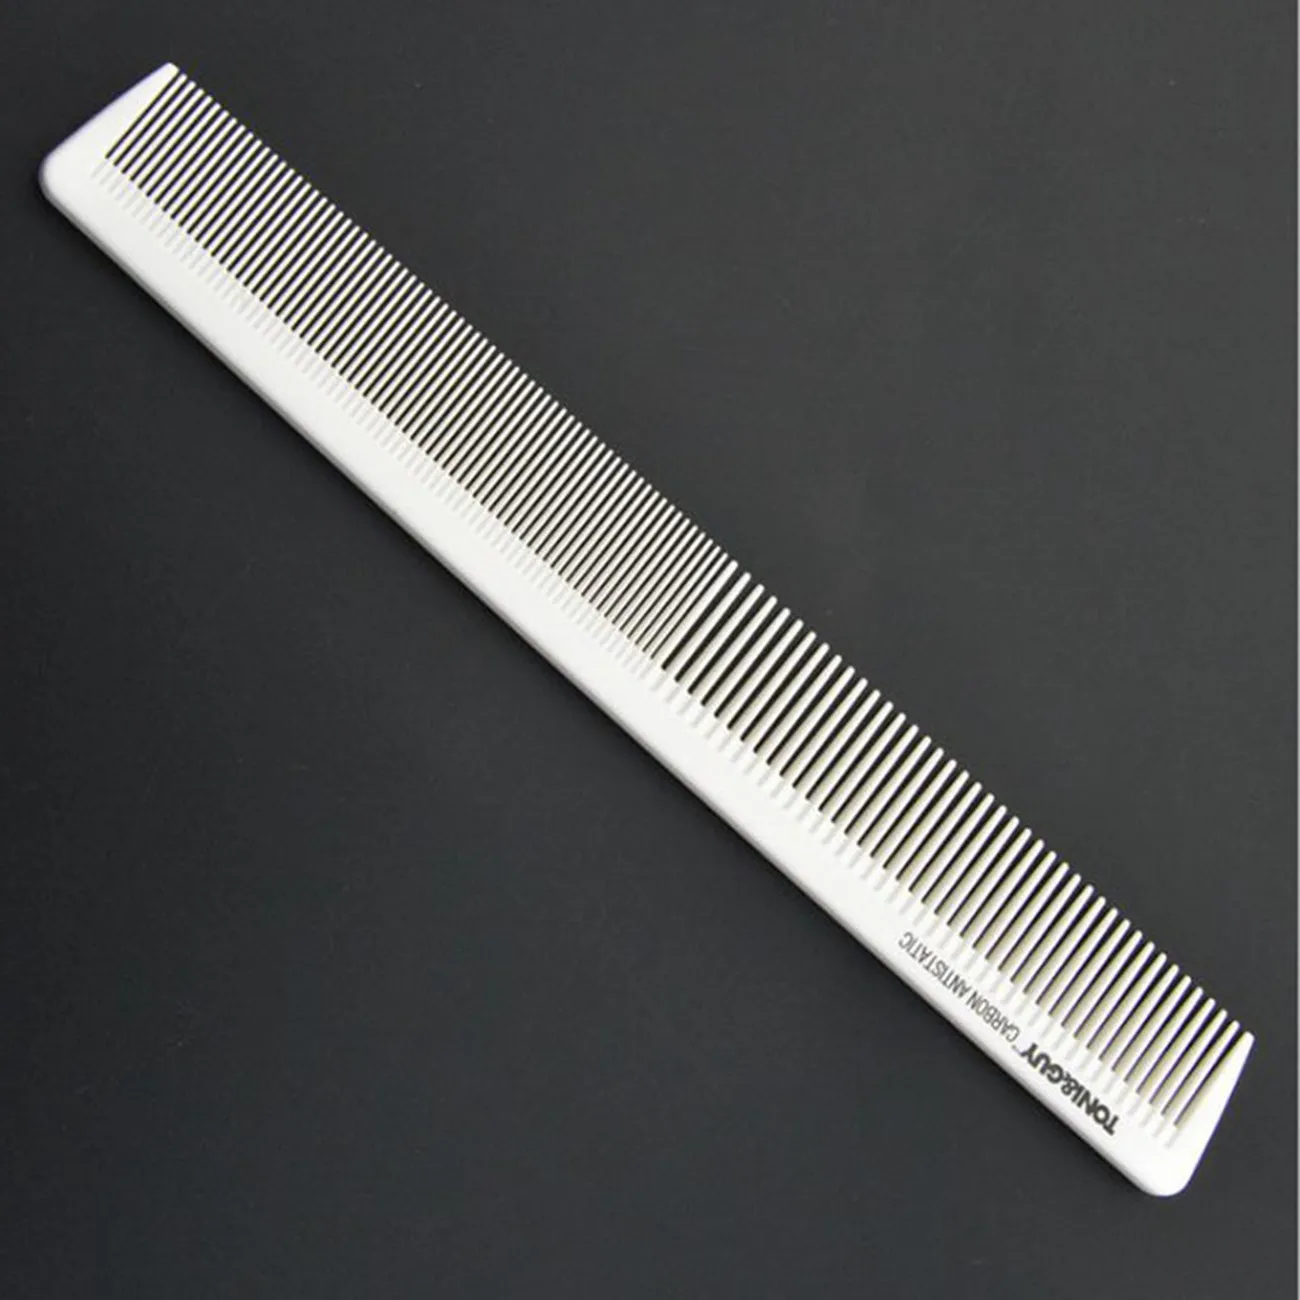 1 Pc White Antistatic Salon Heat-Resistant Taper Cutting Comb for Hairdressing Hair Styling Tool